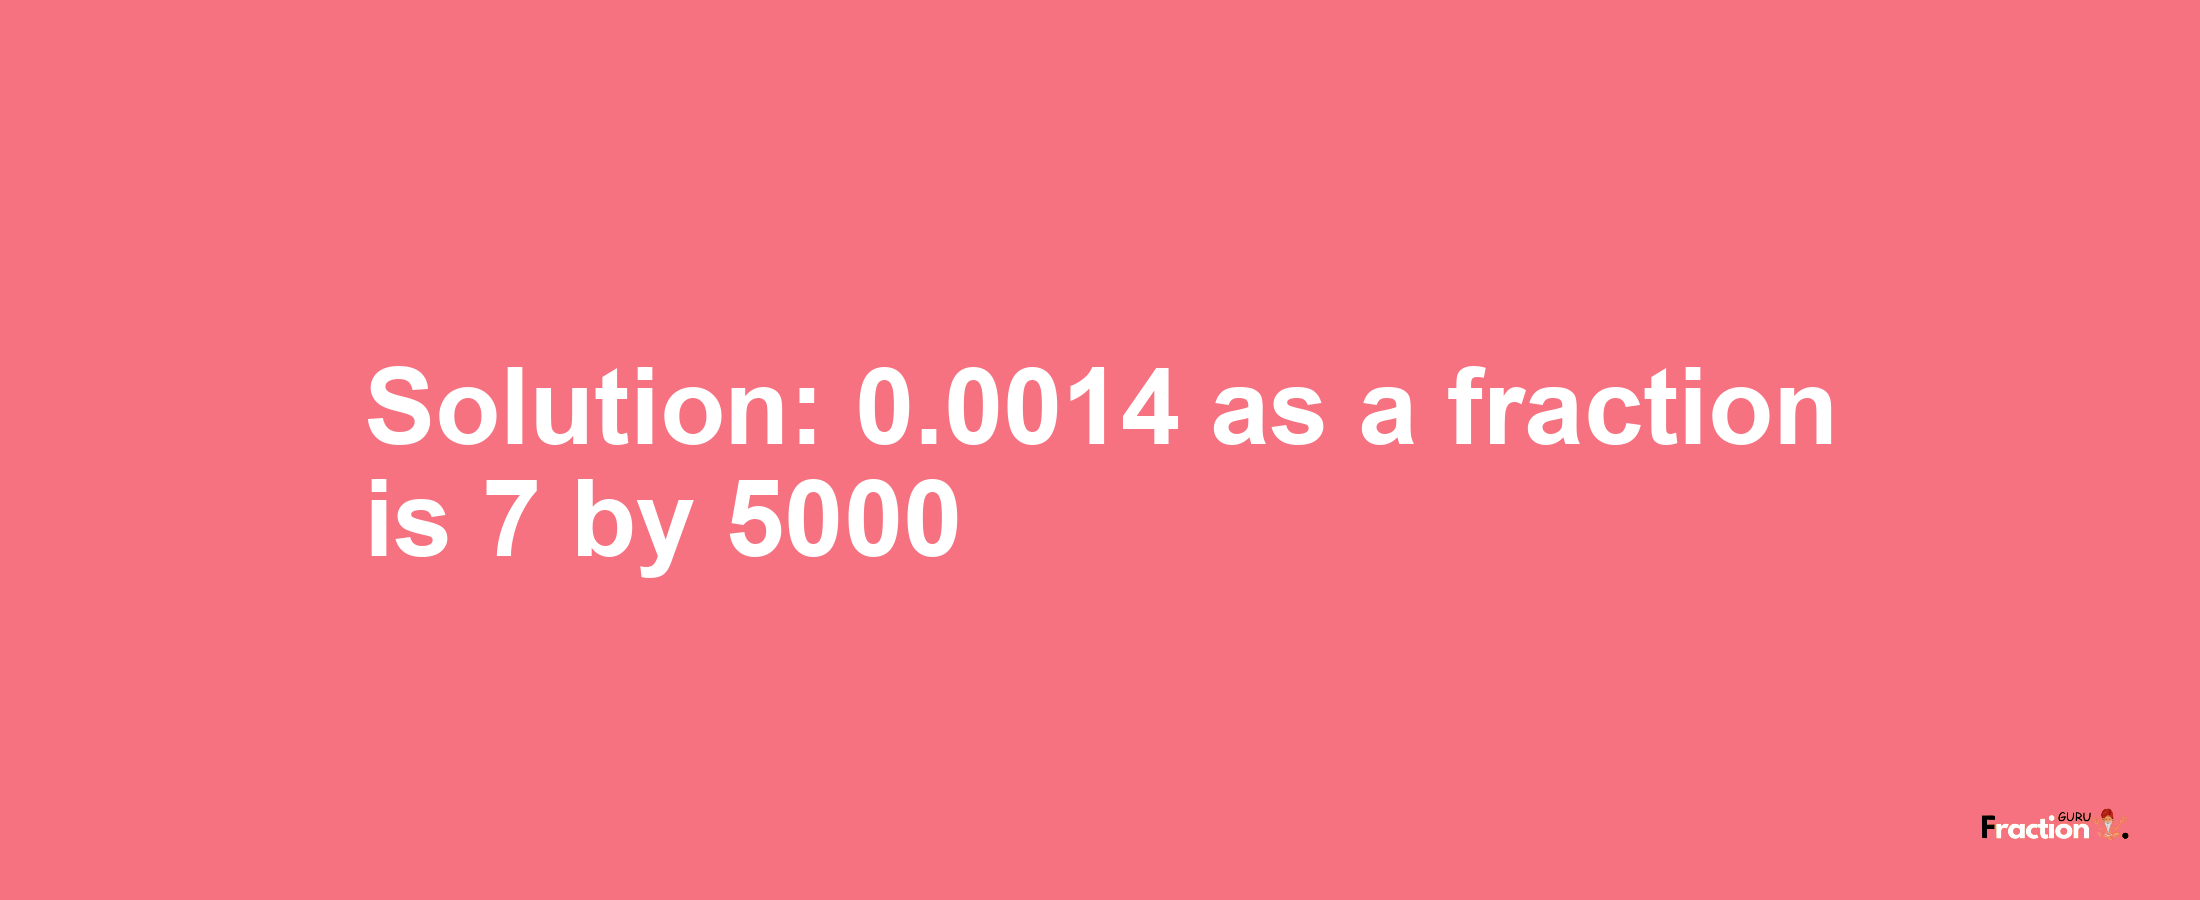 Solution:0.0014 as a fraction is 7/5000